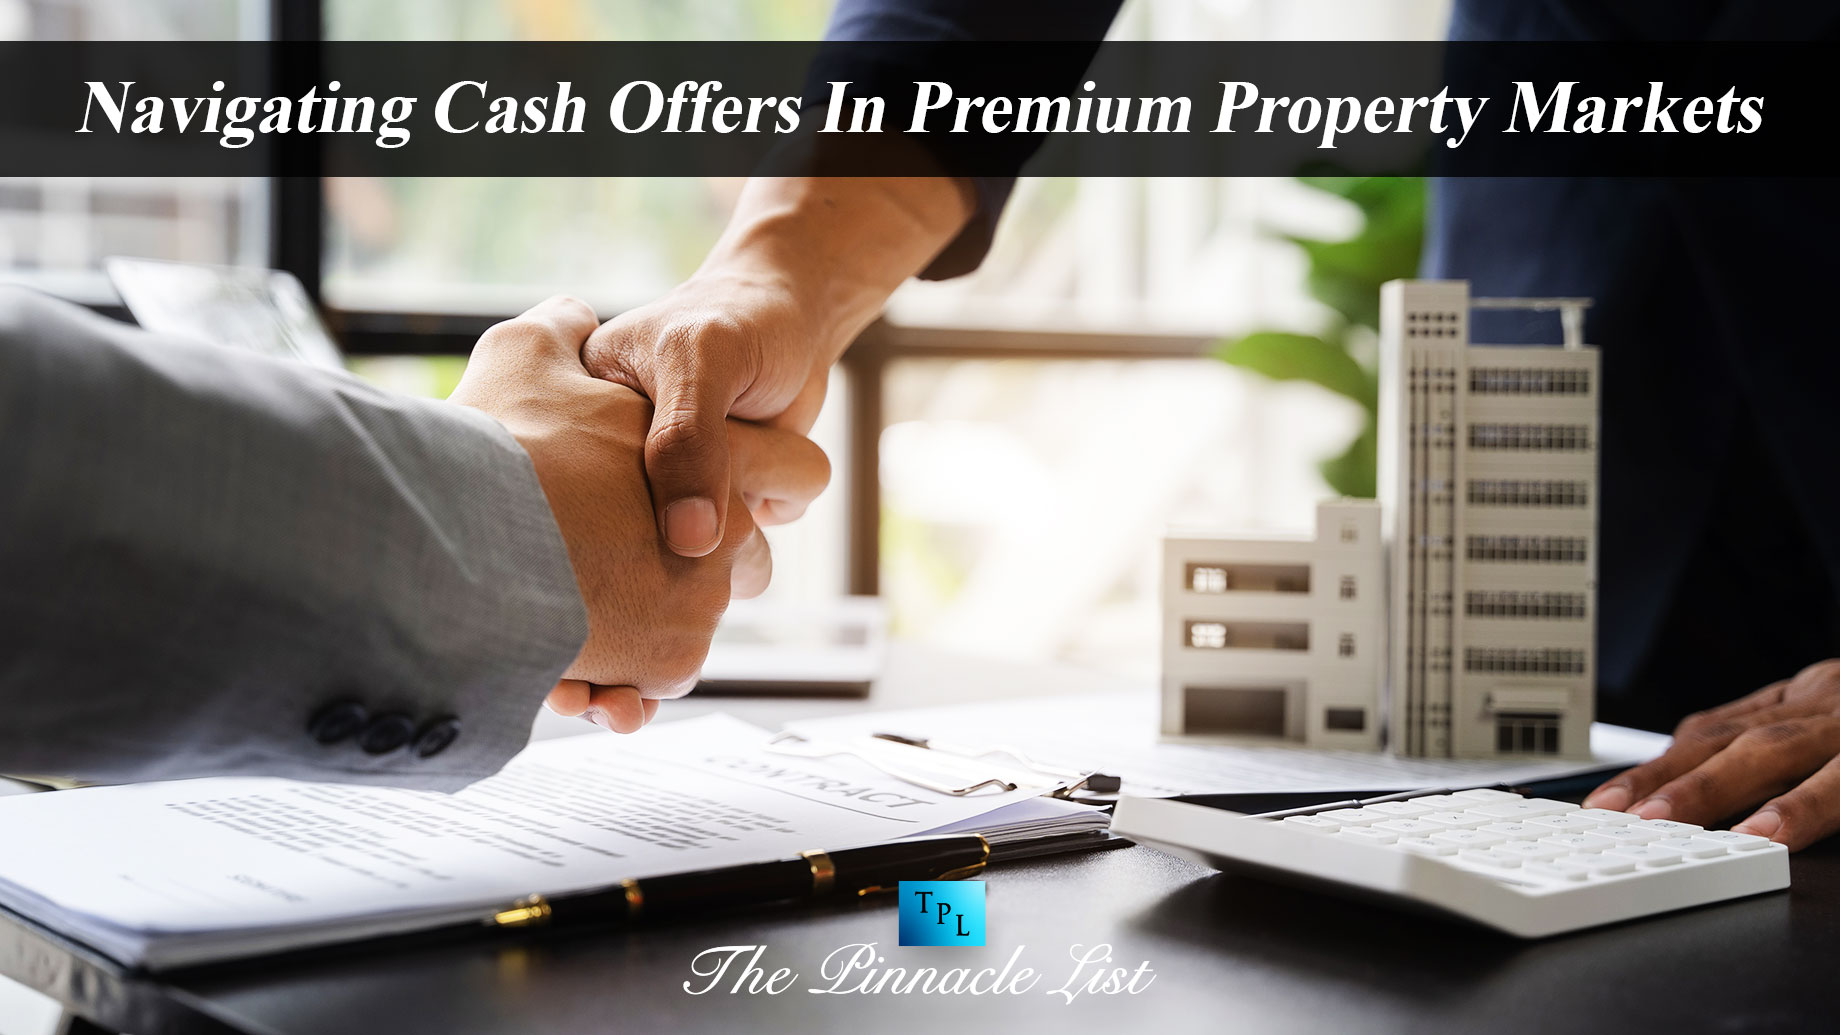 Navigating Cash Offers In Premium Property Markets